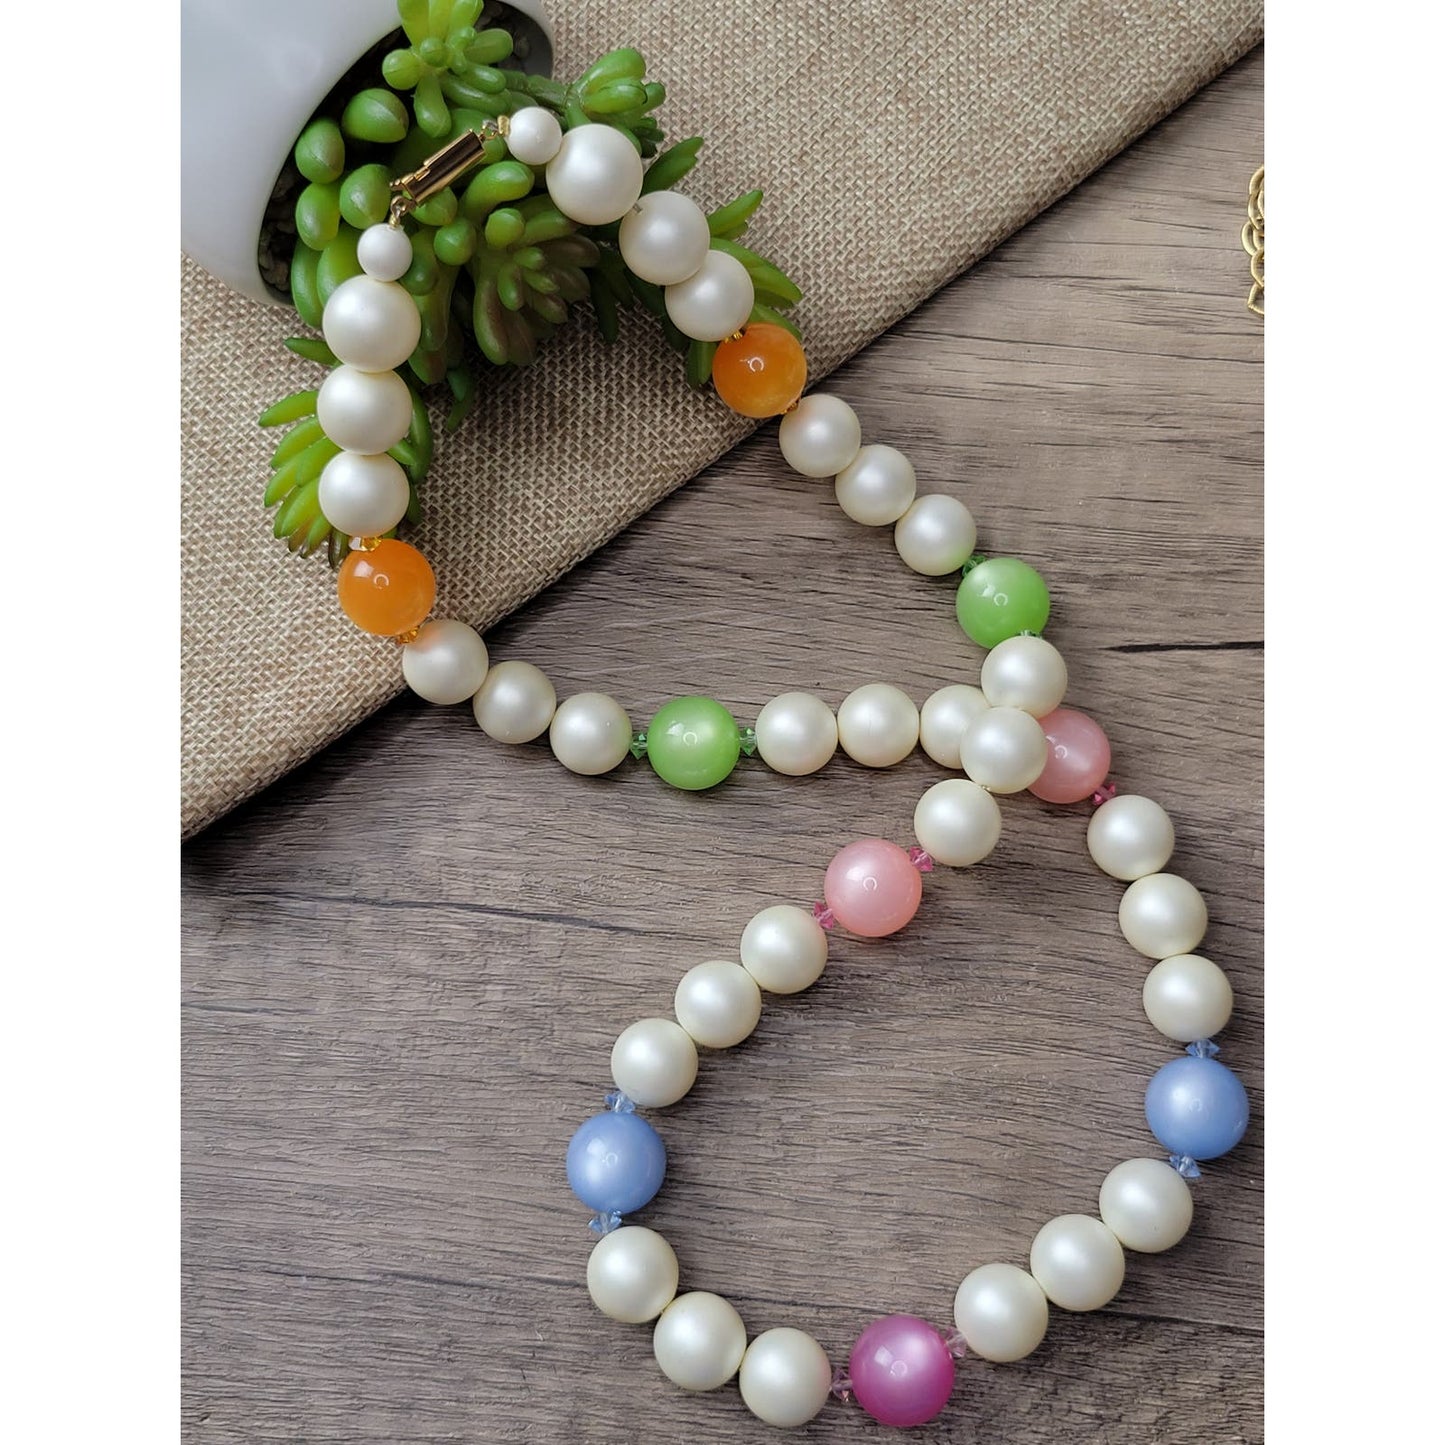 Vintage pastels moonglow lucite faux pearl and crystal necklace, 1960s deadstock jewelry